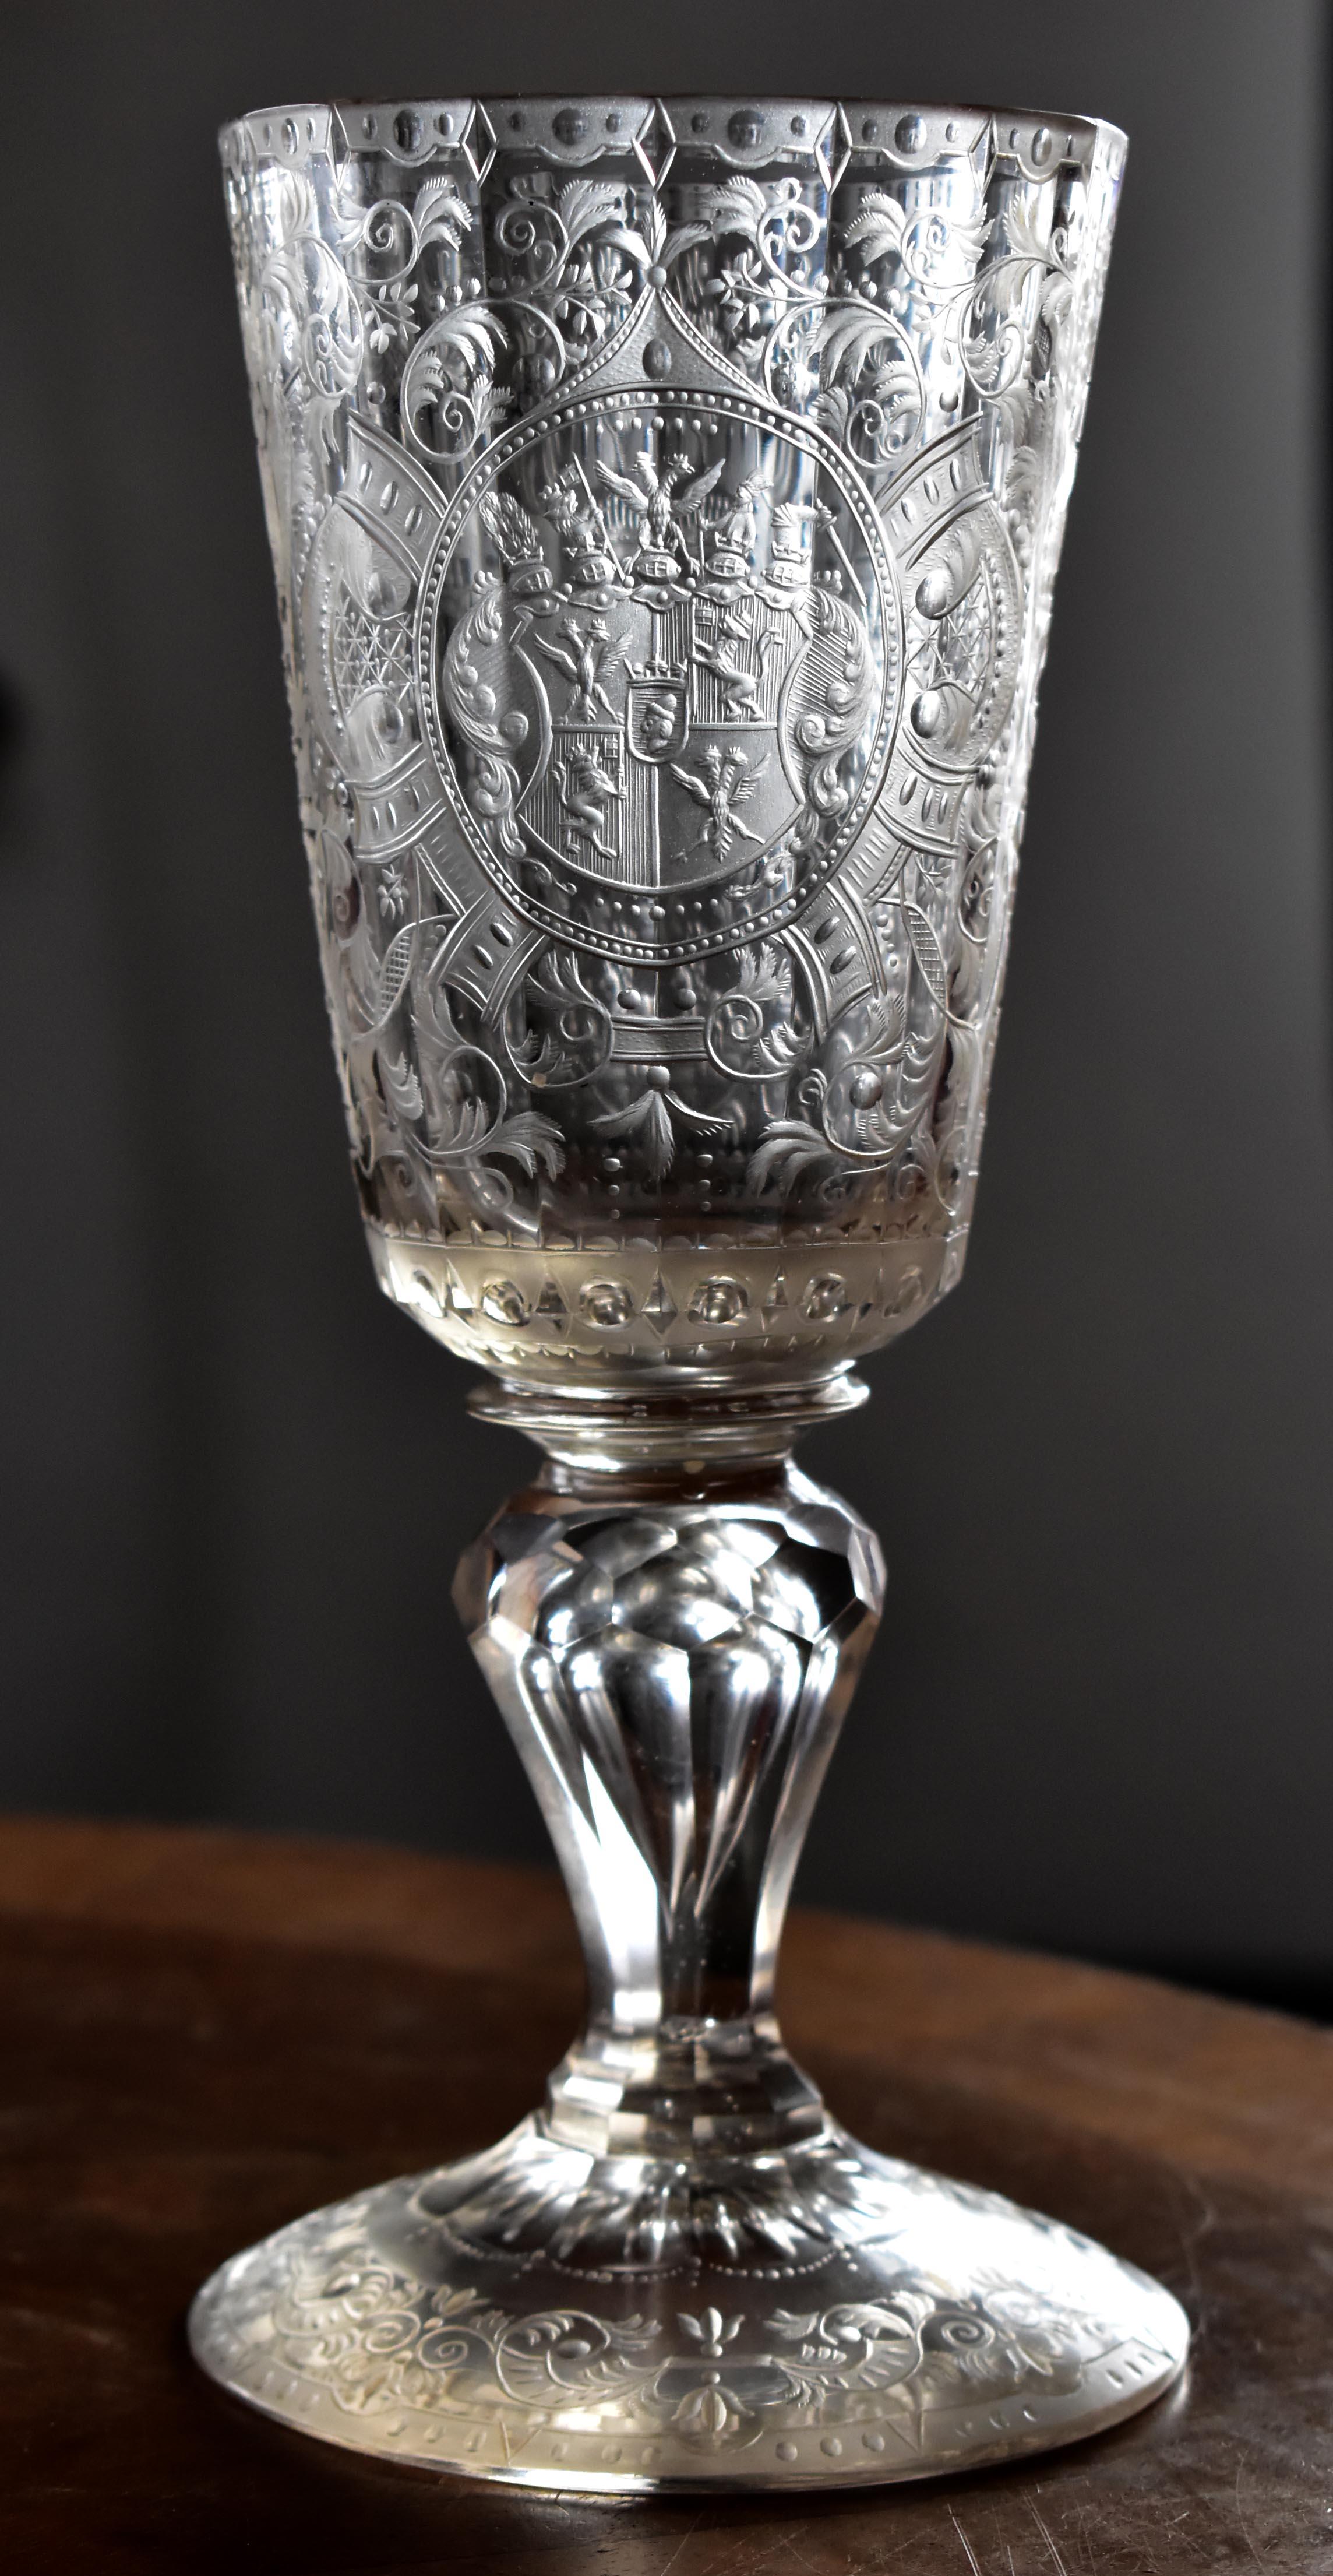 A unique antique cut glass cup with an engraving of the coat of arms of the famous noble family of Spork. Mention of this family dates back to the 16th century, their entire history can be traced. This is a clear goblet with facet cutting and very